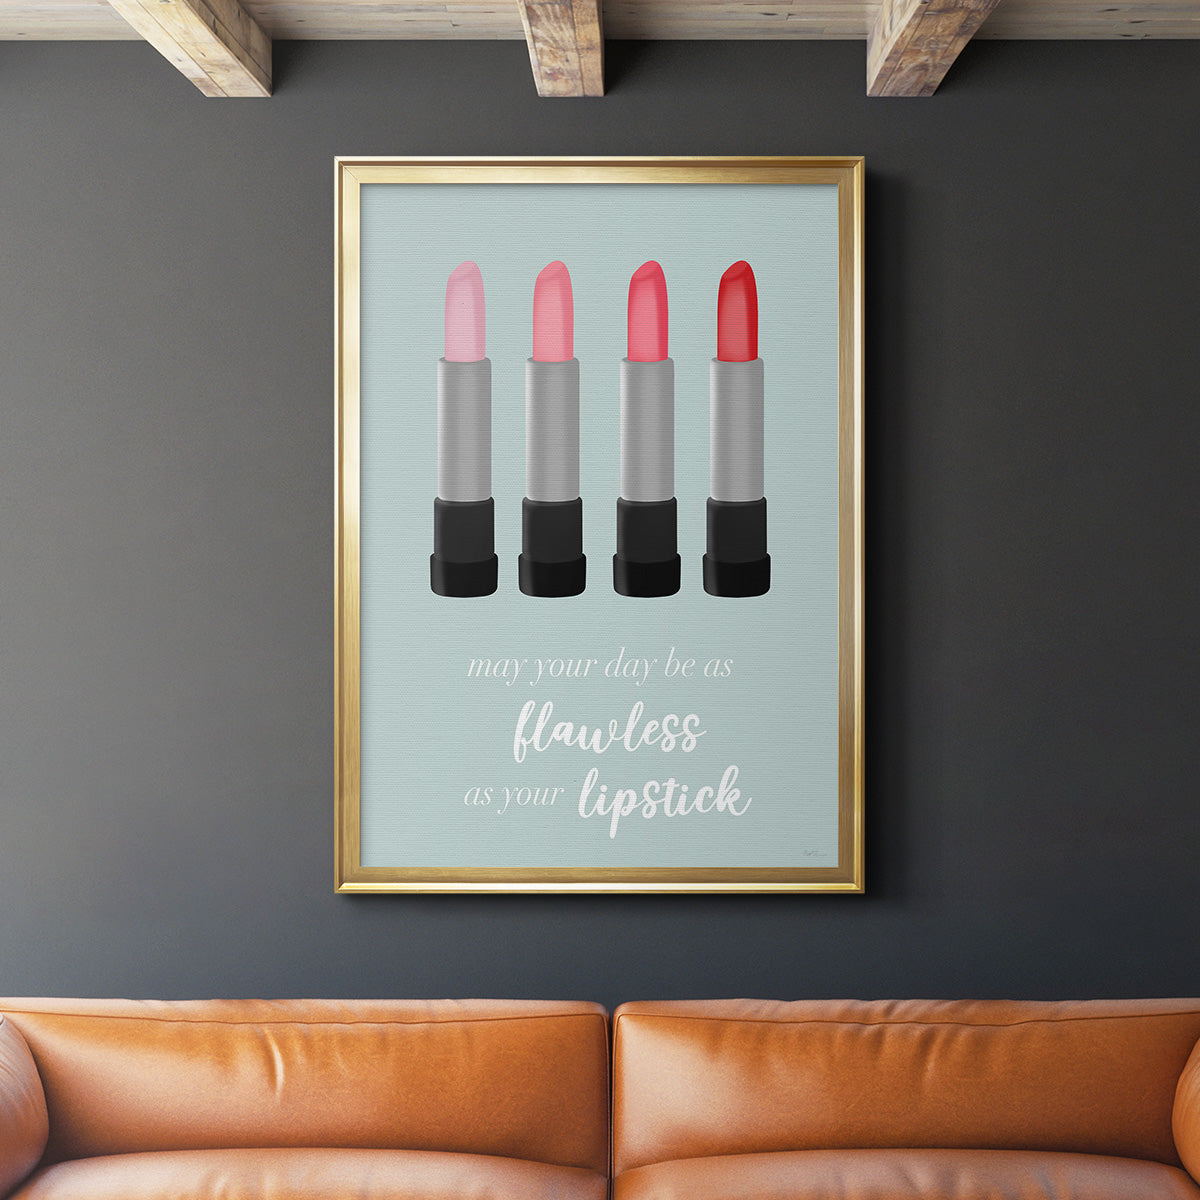 Flawless Lipstick Premium Framed Print - Ready to Hang